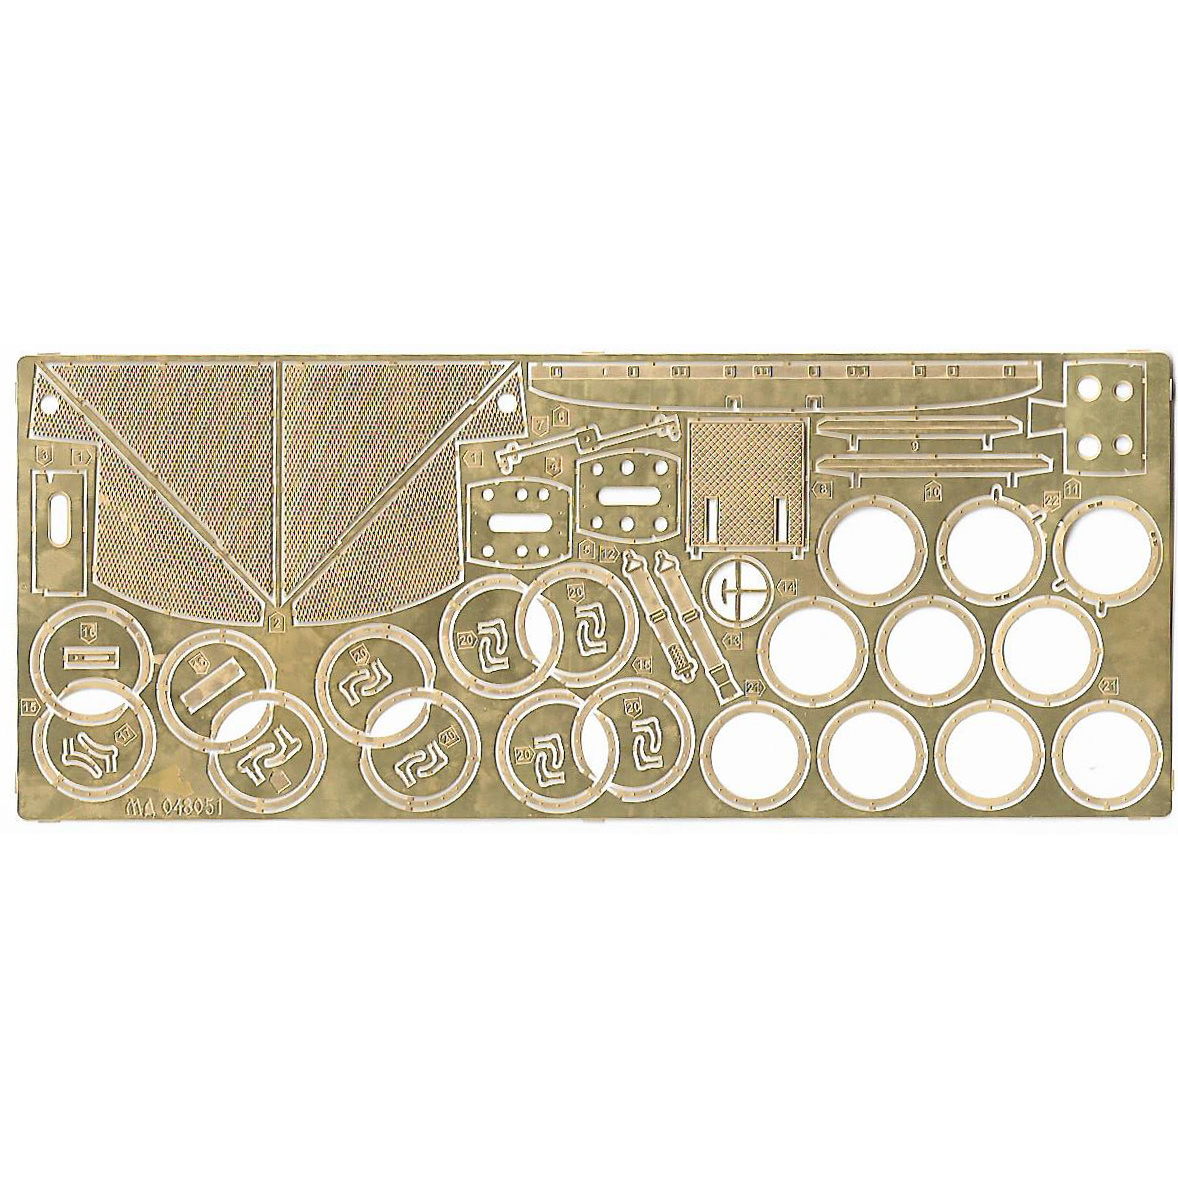 048051 Microdesign 1/48 Photo etching kit of the amphibious transport compartment for the Zvezda model, art. 4828